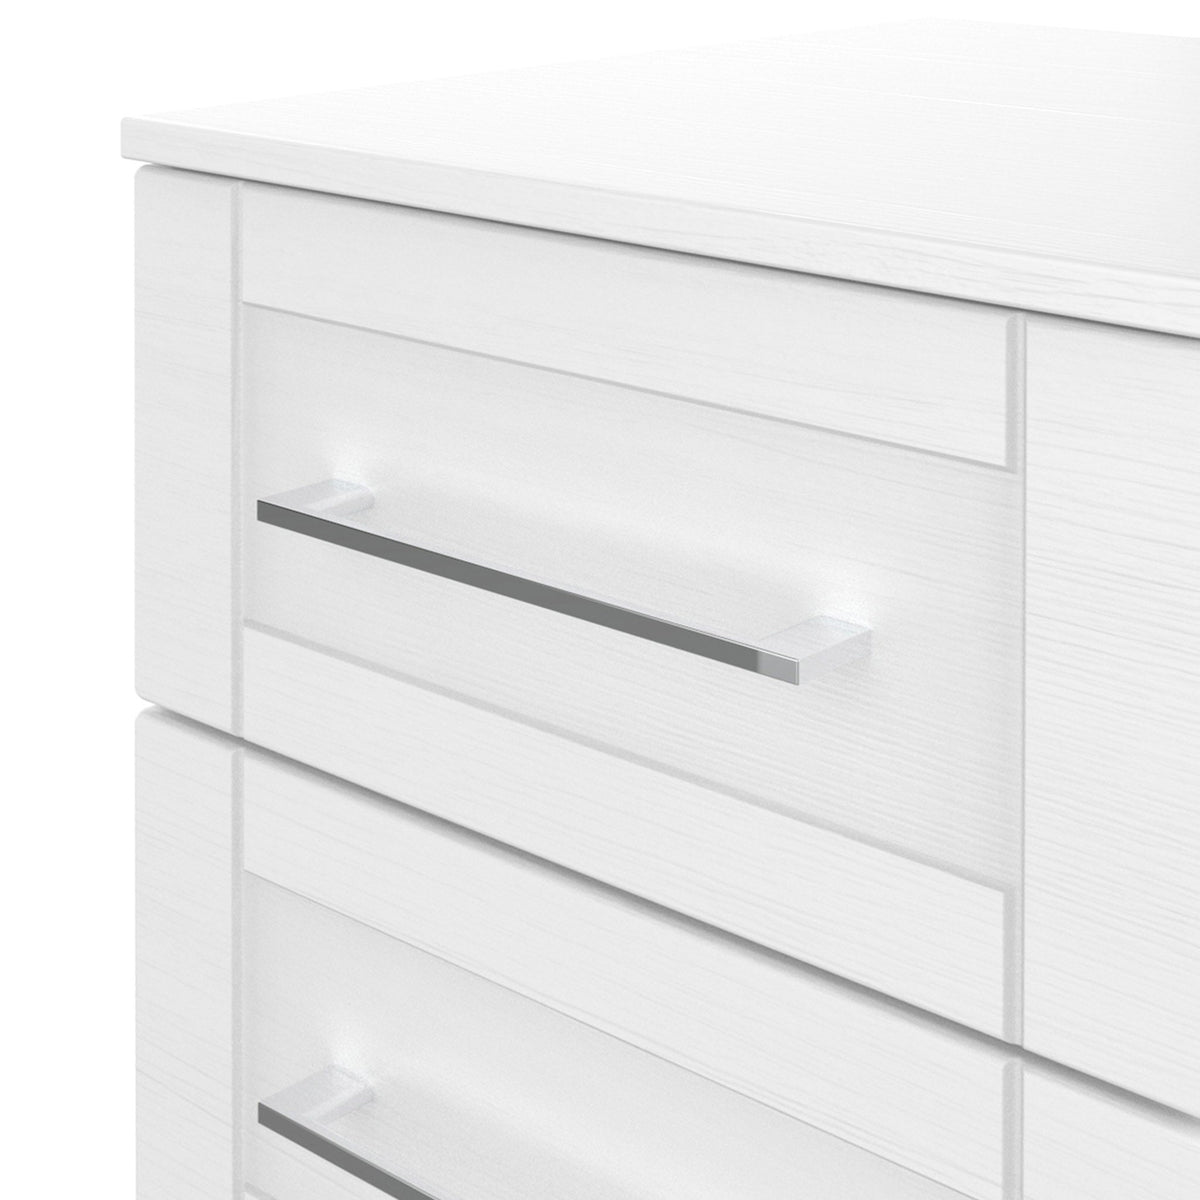 Bellamy White 2 Drawer Bedside Table Cabinet chrome handle close up